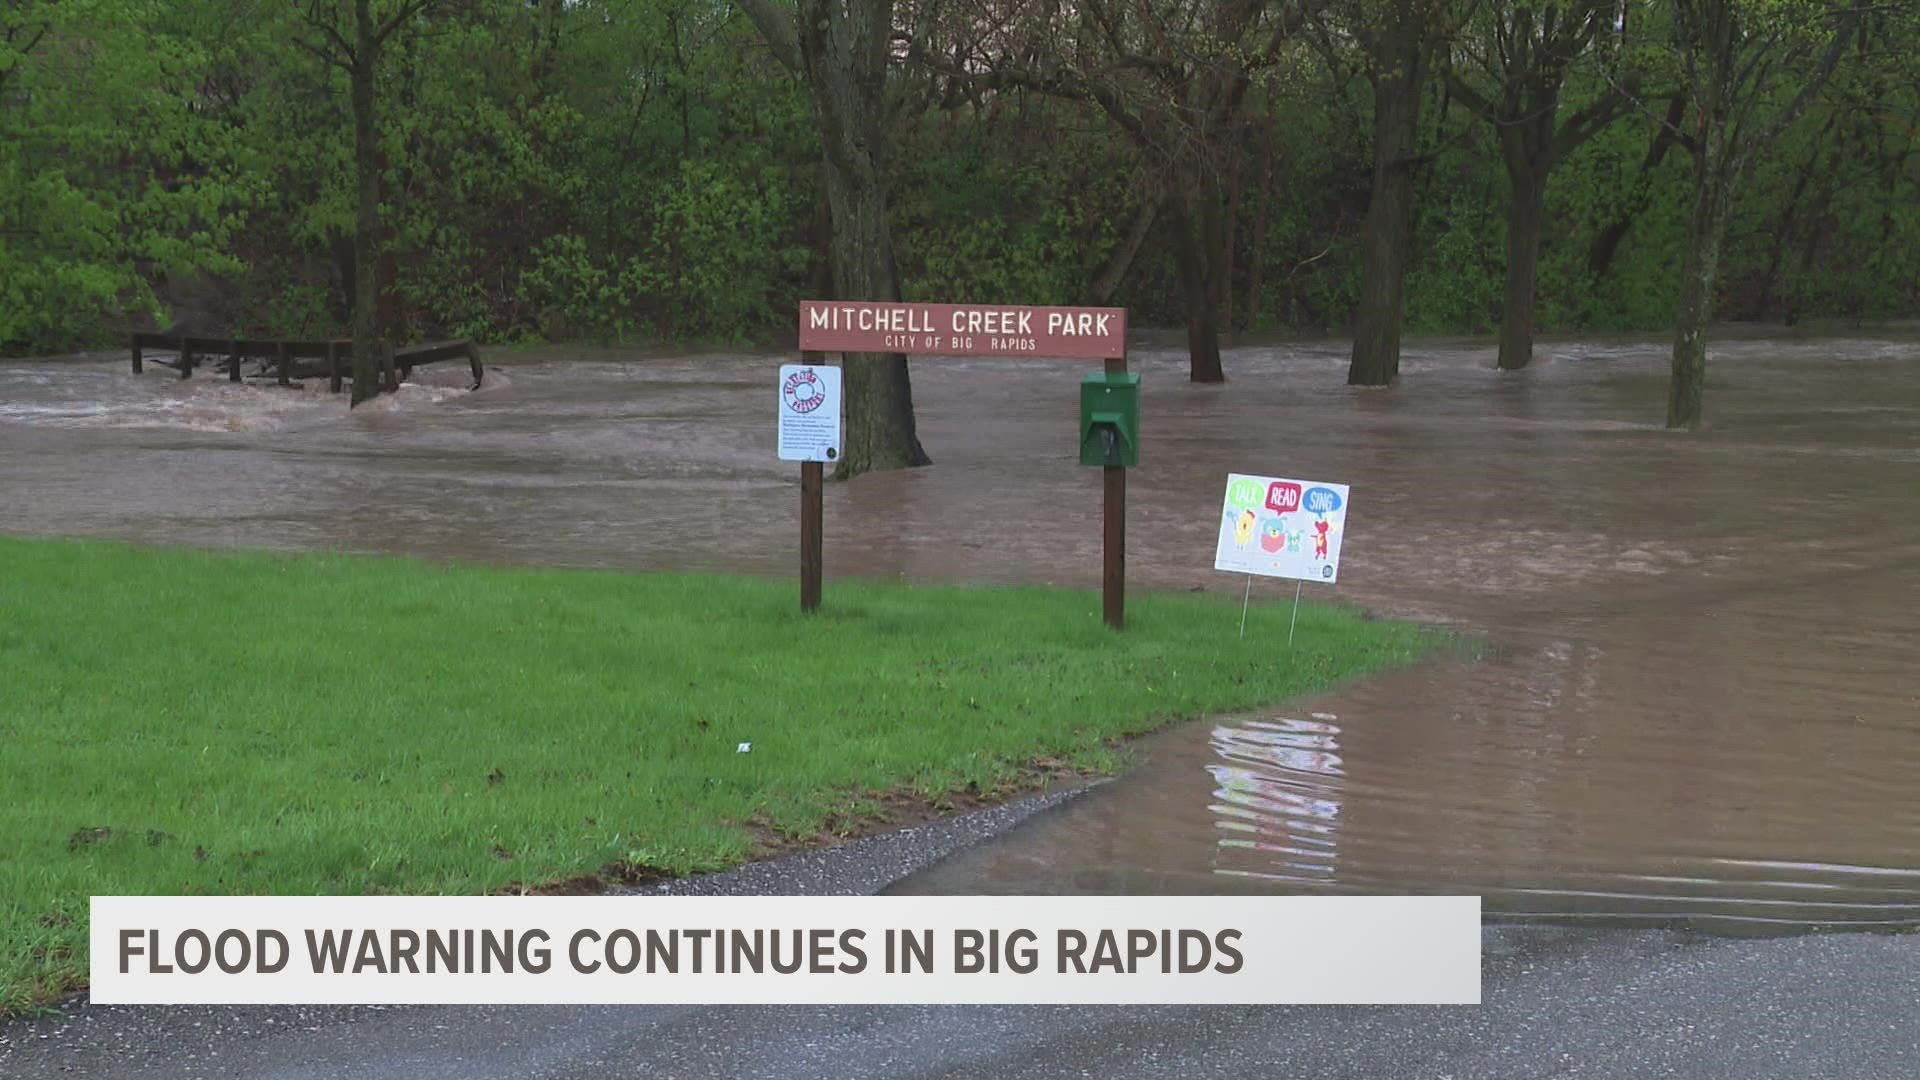 Officials say Wednesday's flooding was the worst Big Rapids has seen in more than 30 years.